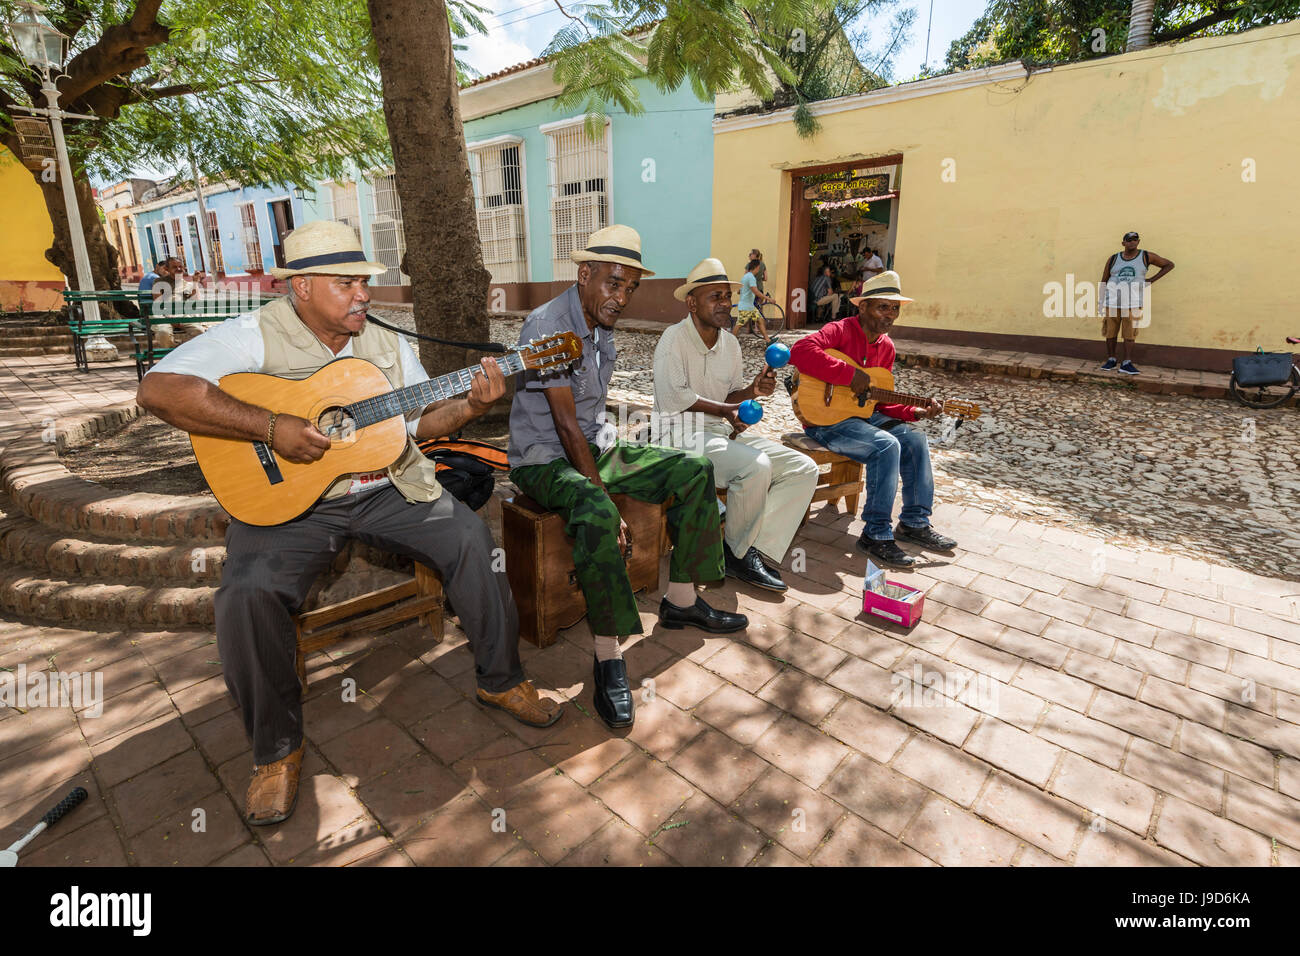 Street performers playing in the city of Trinidad, UNESCO World Heritage Site, Cuba, West Indies, Caribbean, Central America Stock Photo